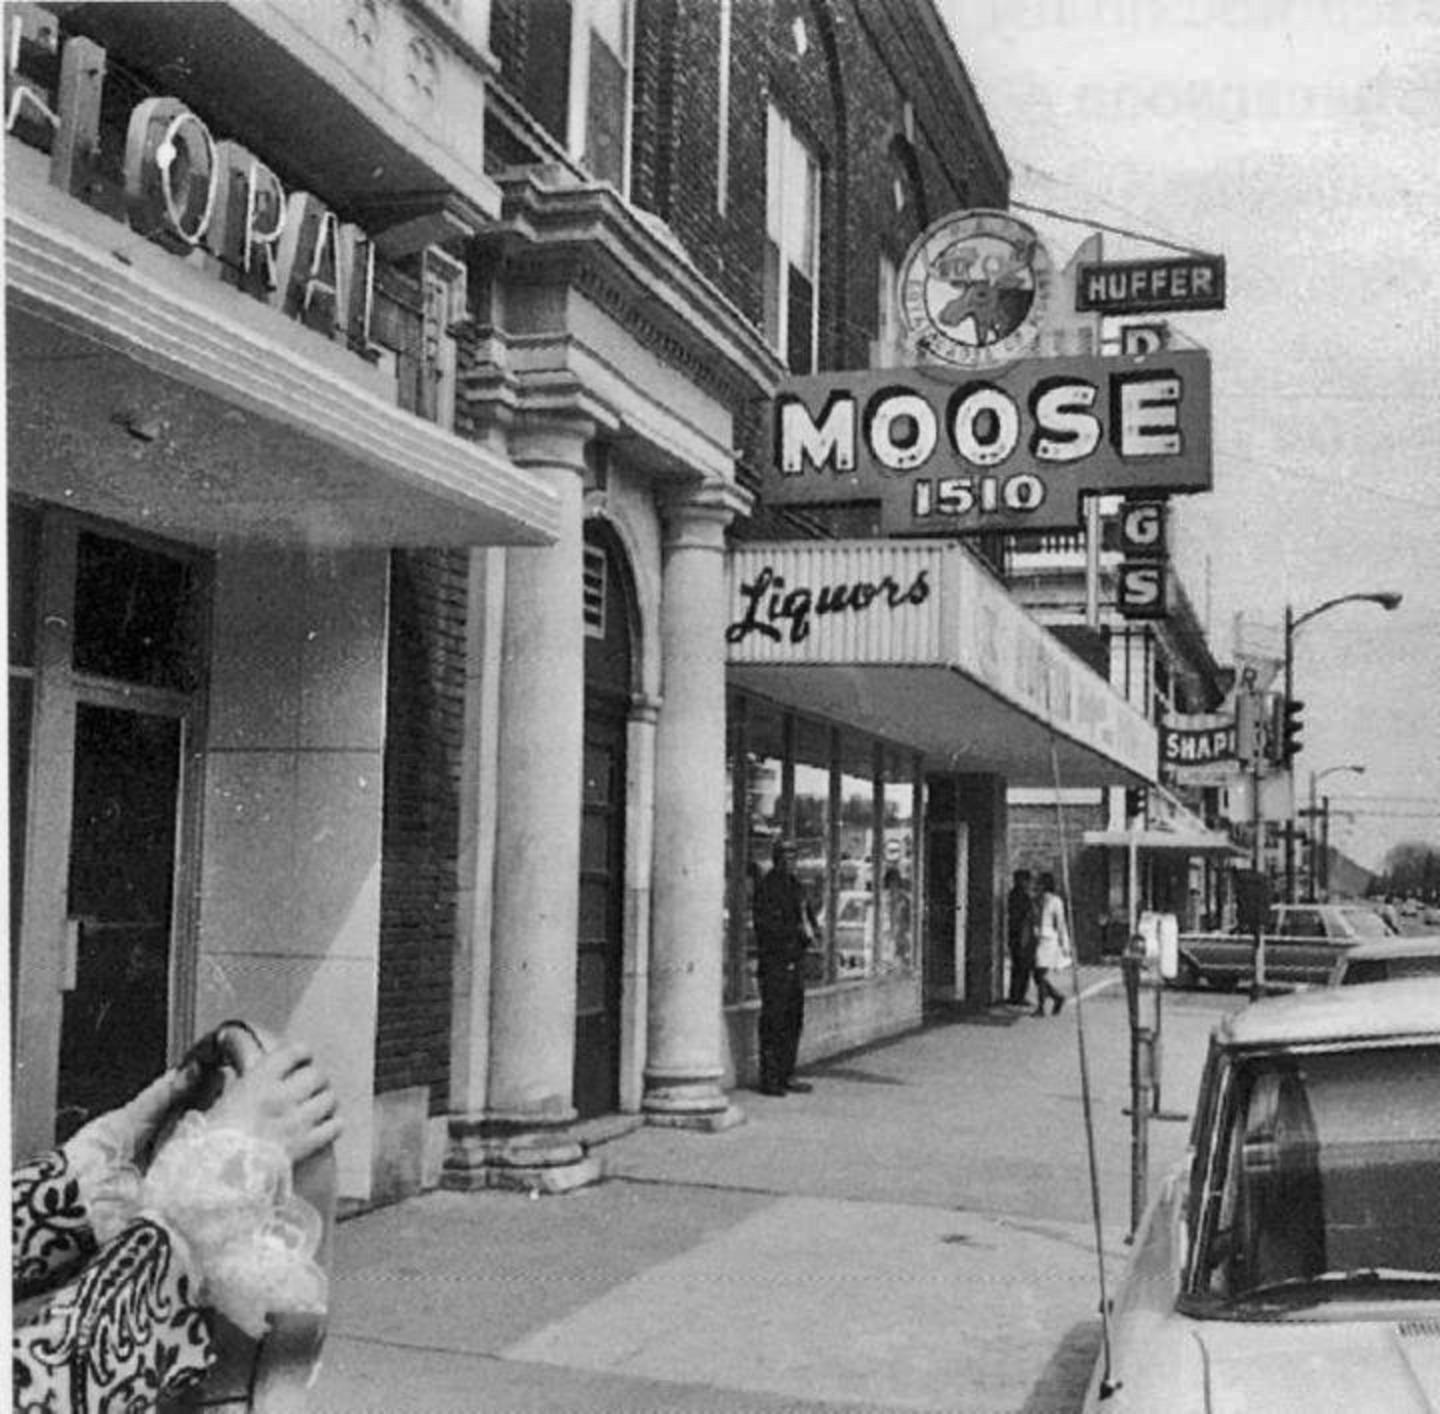 The Moose Lodge in Hibbing where Helstrom met Bob and saw him playing guitar and singing for the first time out along the street. In fact, Echo's hands can be seen at left on the parking meter.  The Moose Lodge is also where Helstrom and Dylan attended their high school reunion in 1969 and Dylan brought his wife, Sara, back to Hibbing for a visit. Photo courtesy Toby Thompson